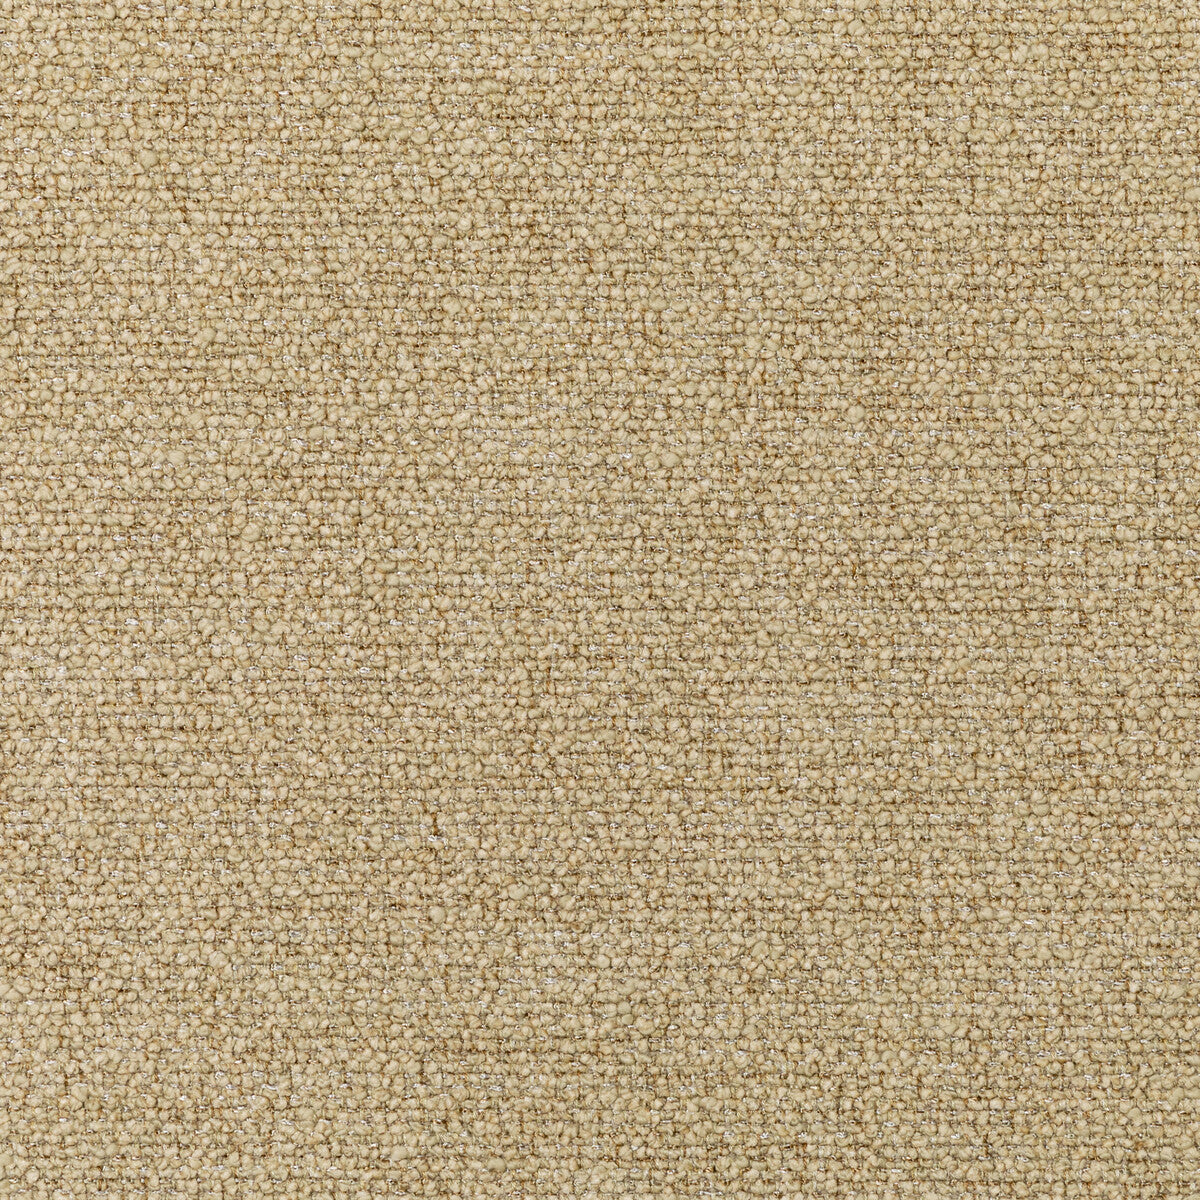 Bali Boucle fabric in camel color - pattern 36051.16.0 - by Kravet Couture in the Luxury Textures II collection